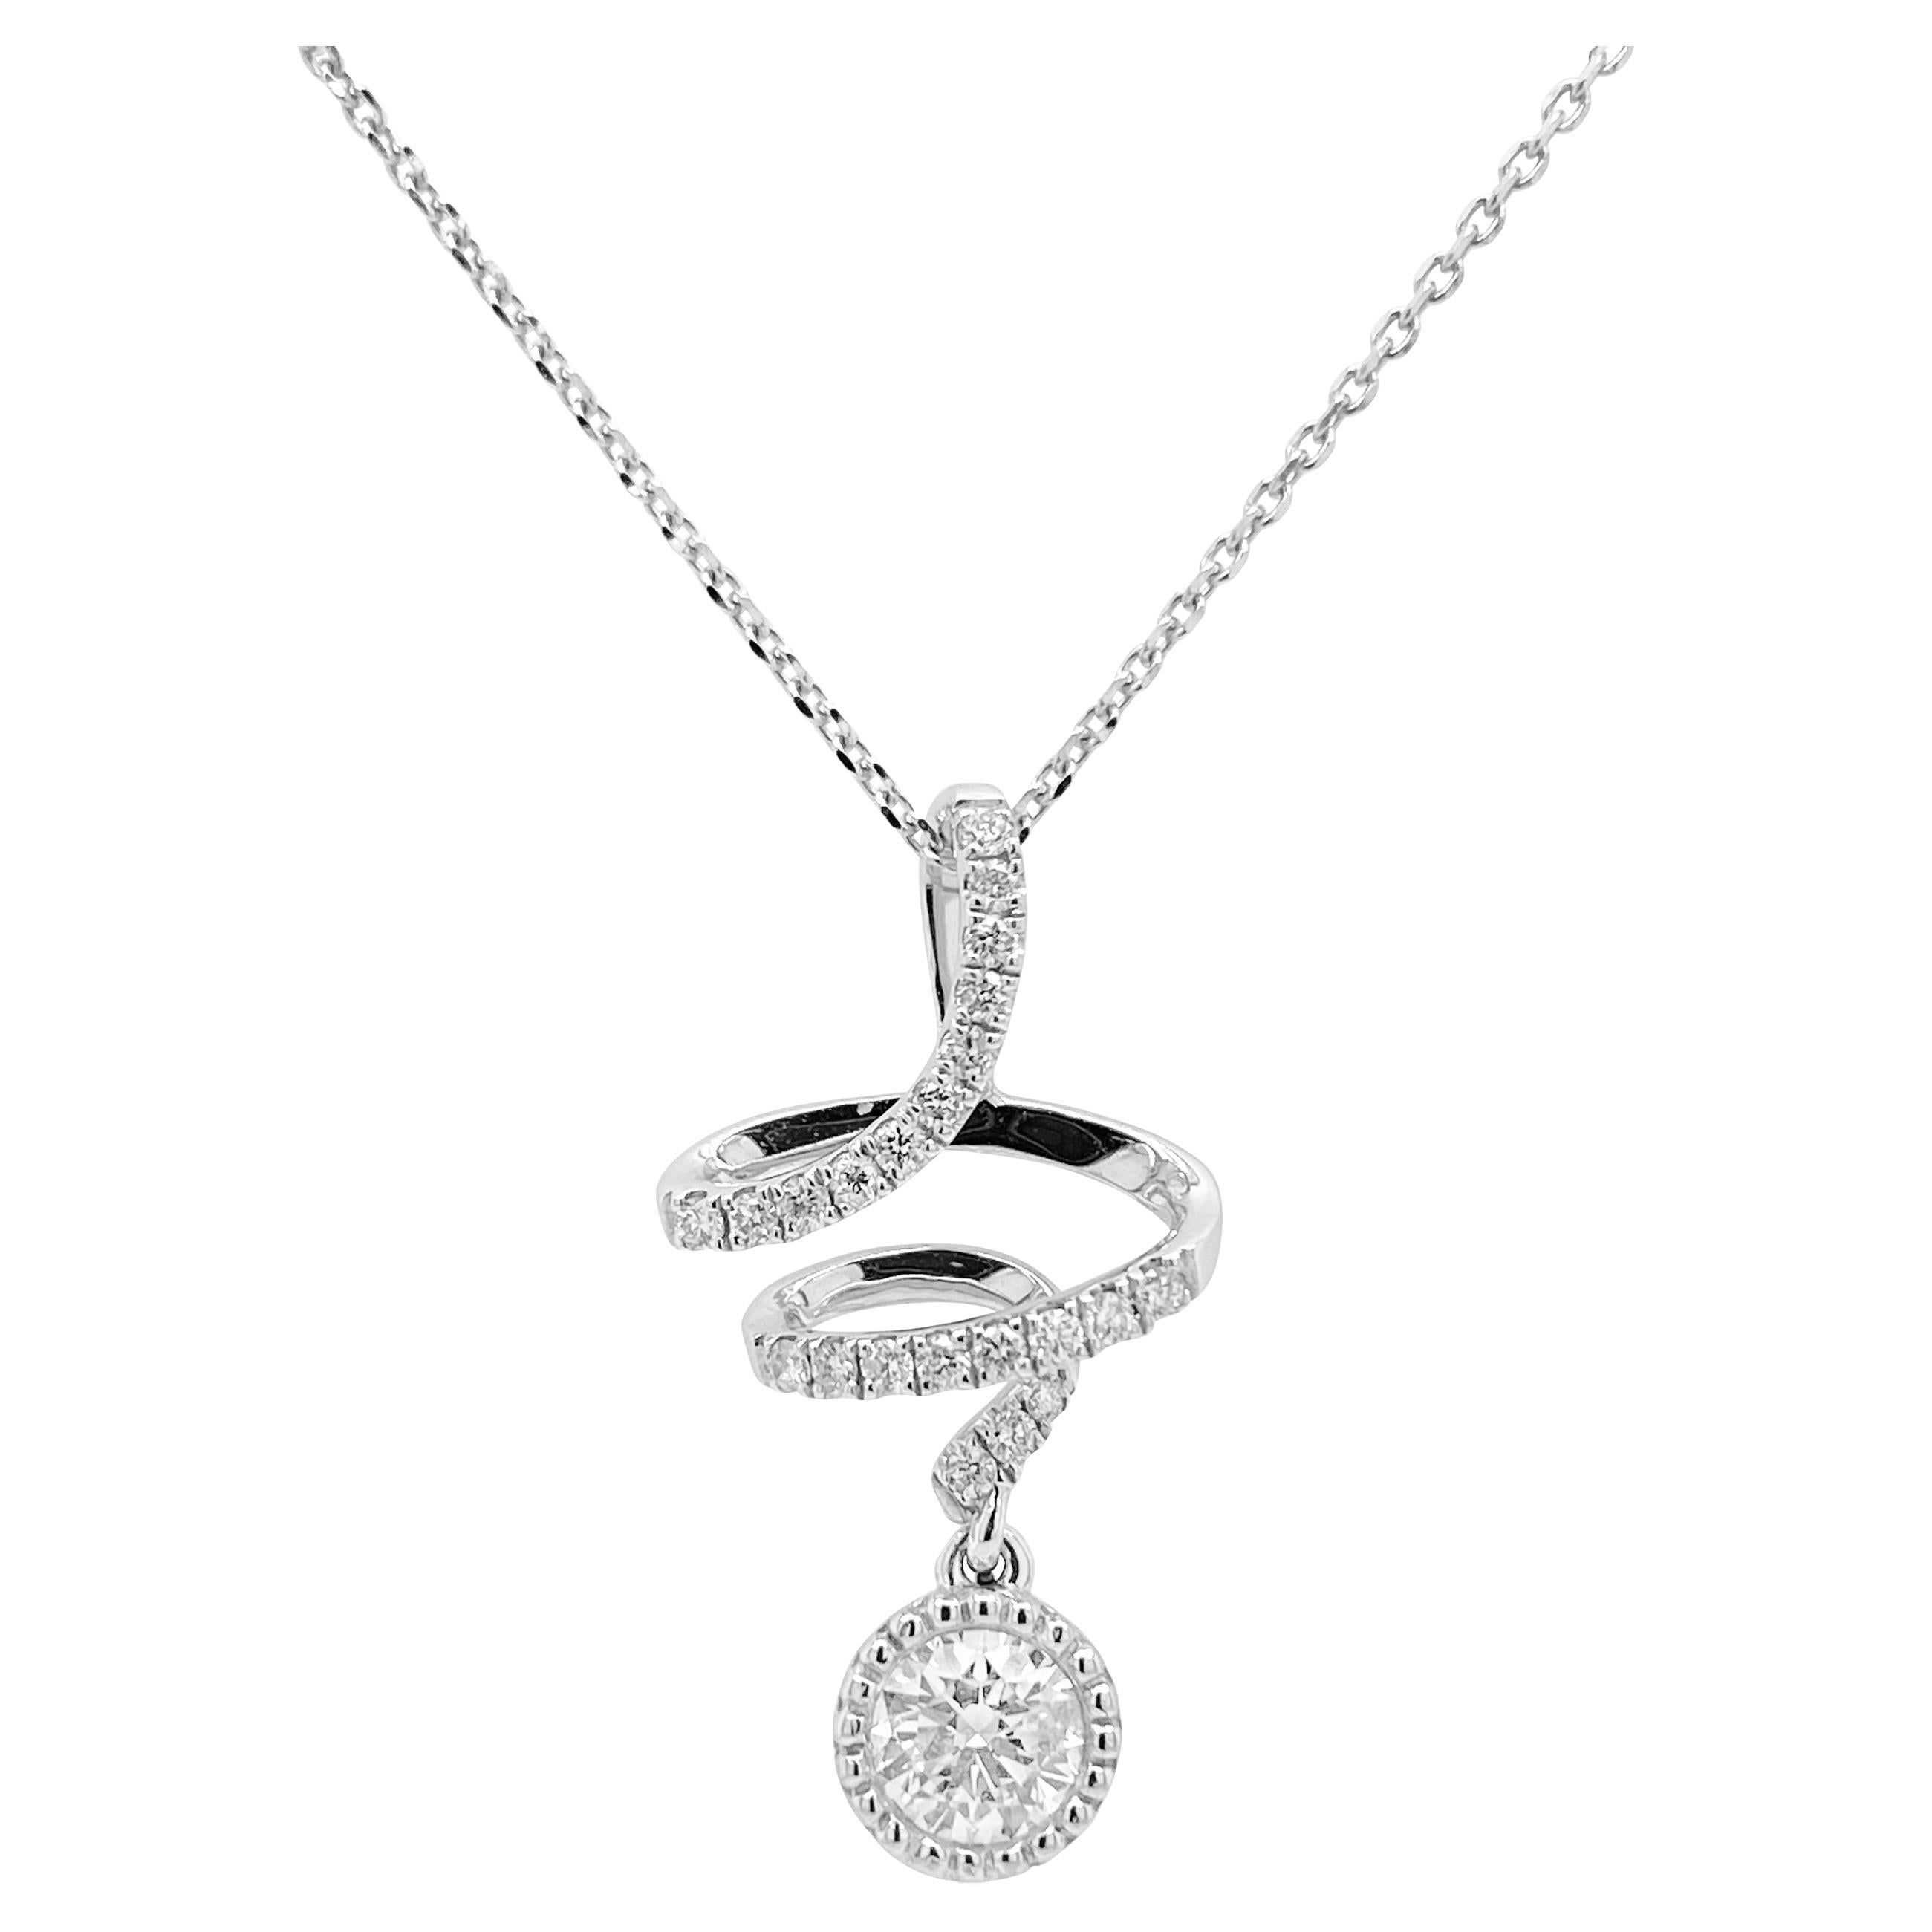 White diamond Pendant made in White Gold with Platinum Chain